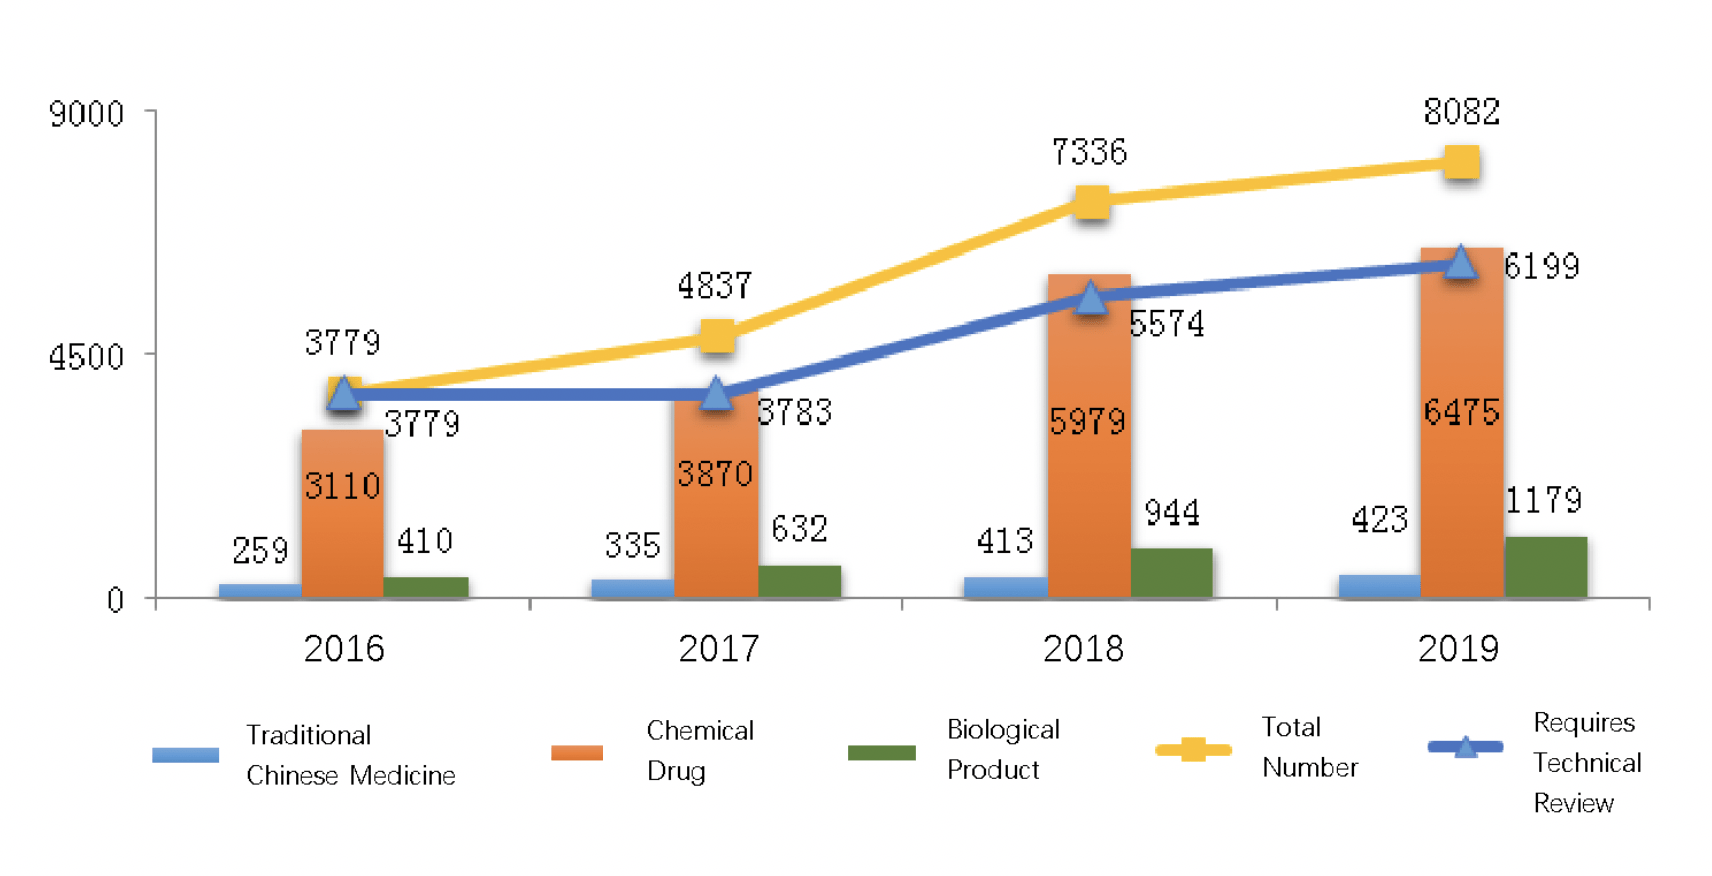 Fig. 1 Comparison of Registration Amount among Different Drug Products from 2016 to 2019